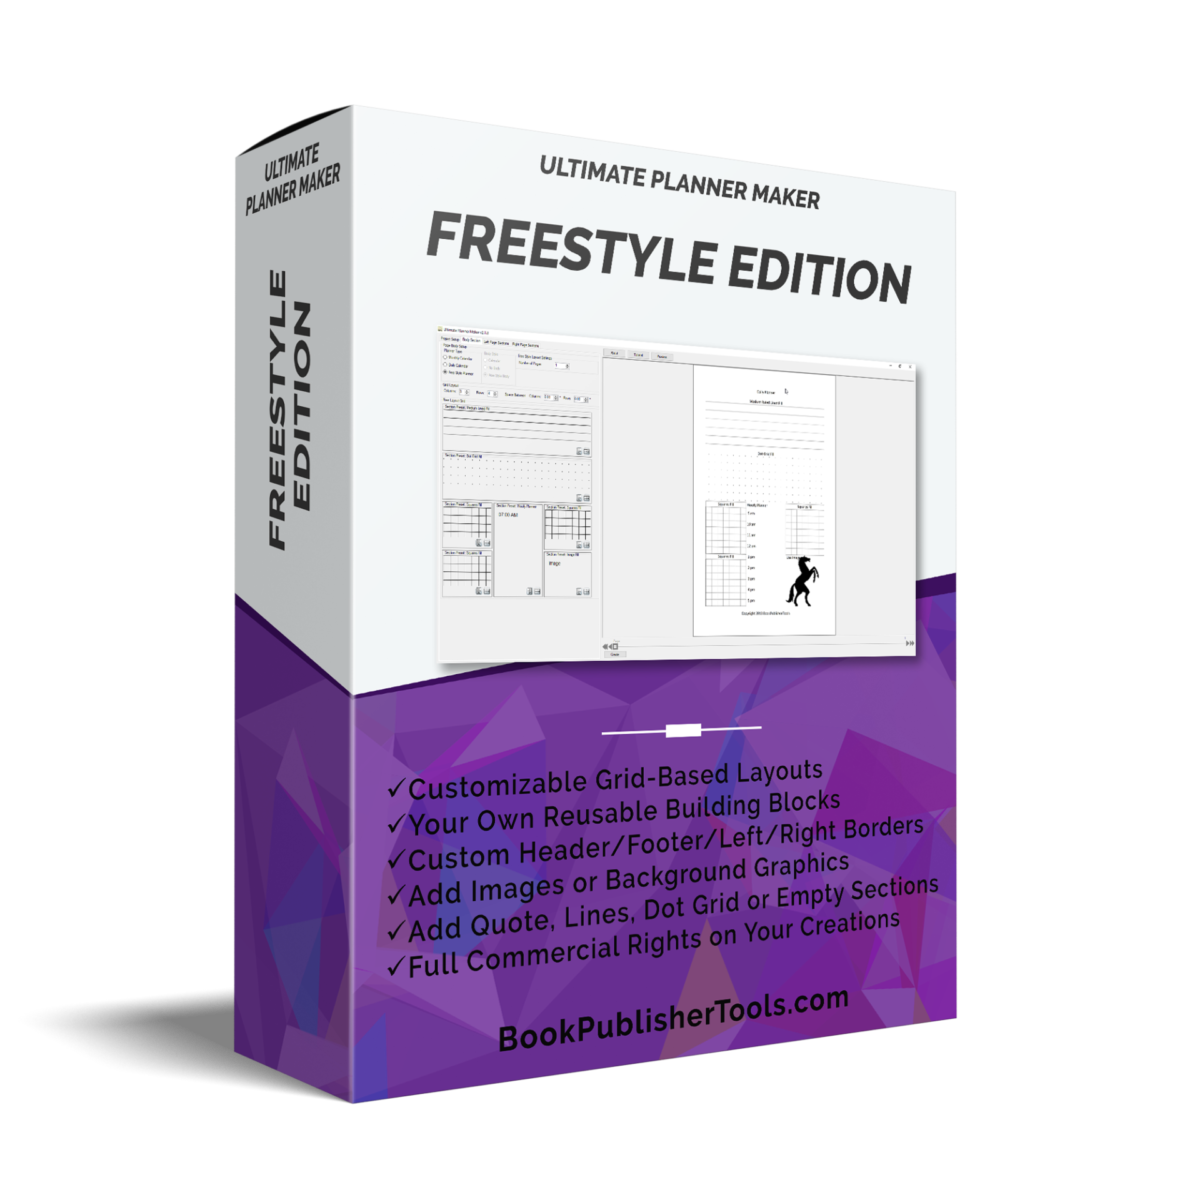 Ultimate Planner Maker FreeStyle Edition software box